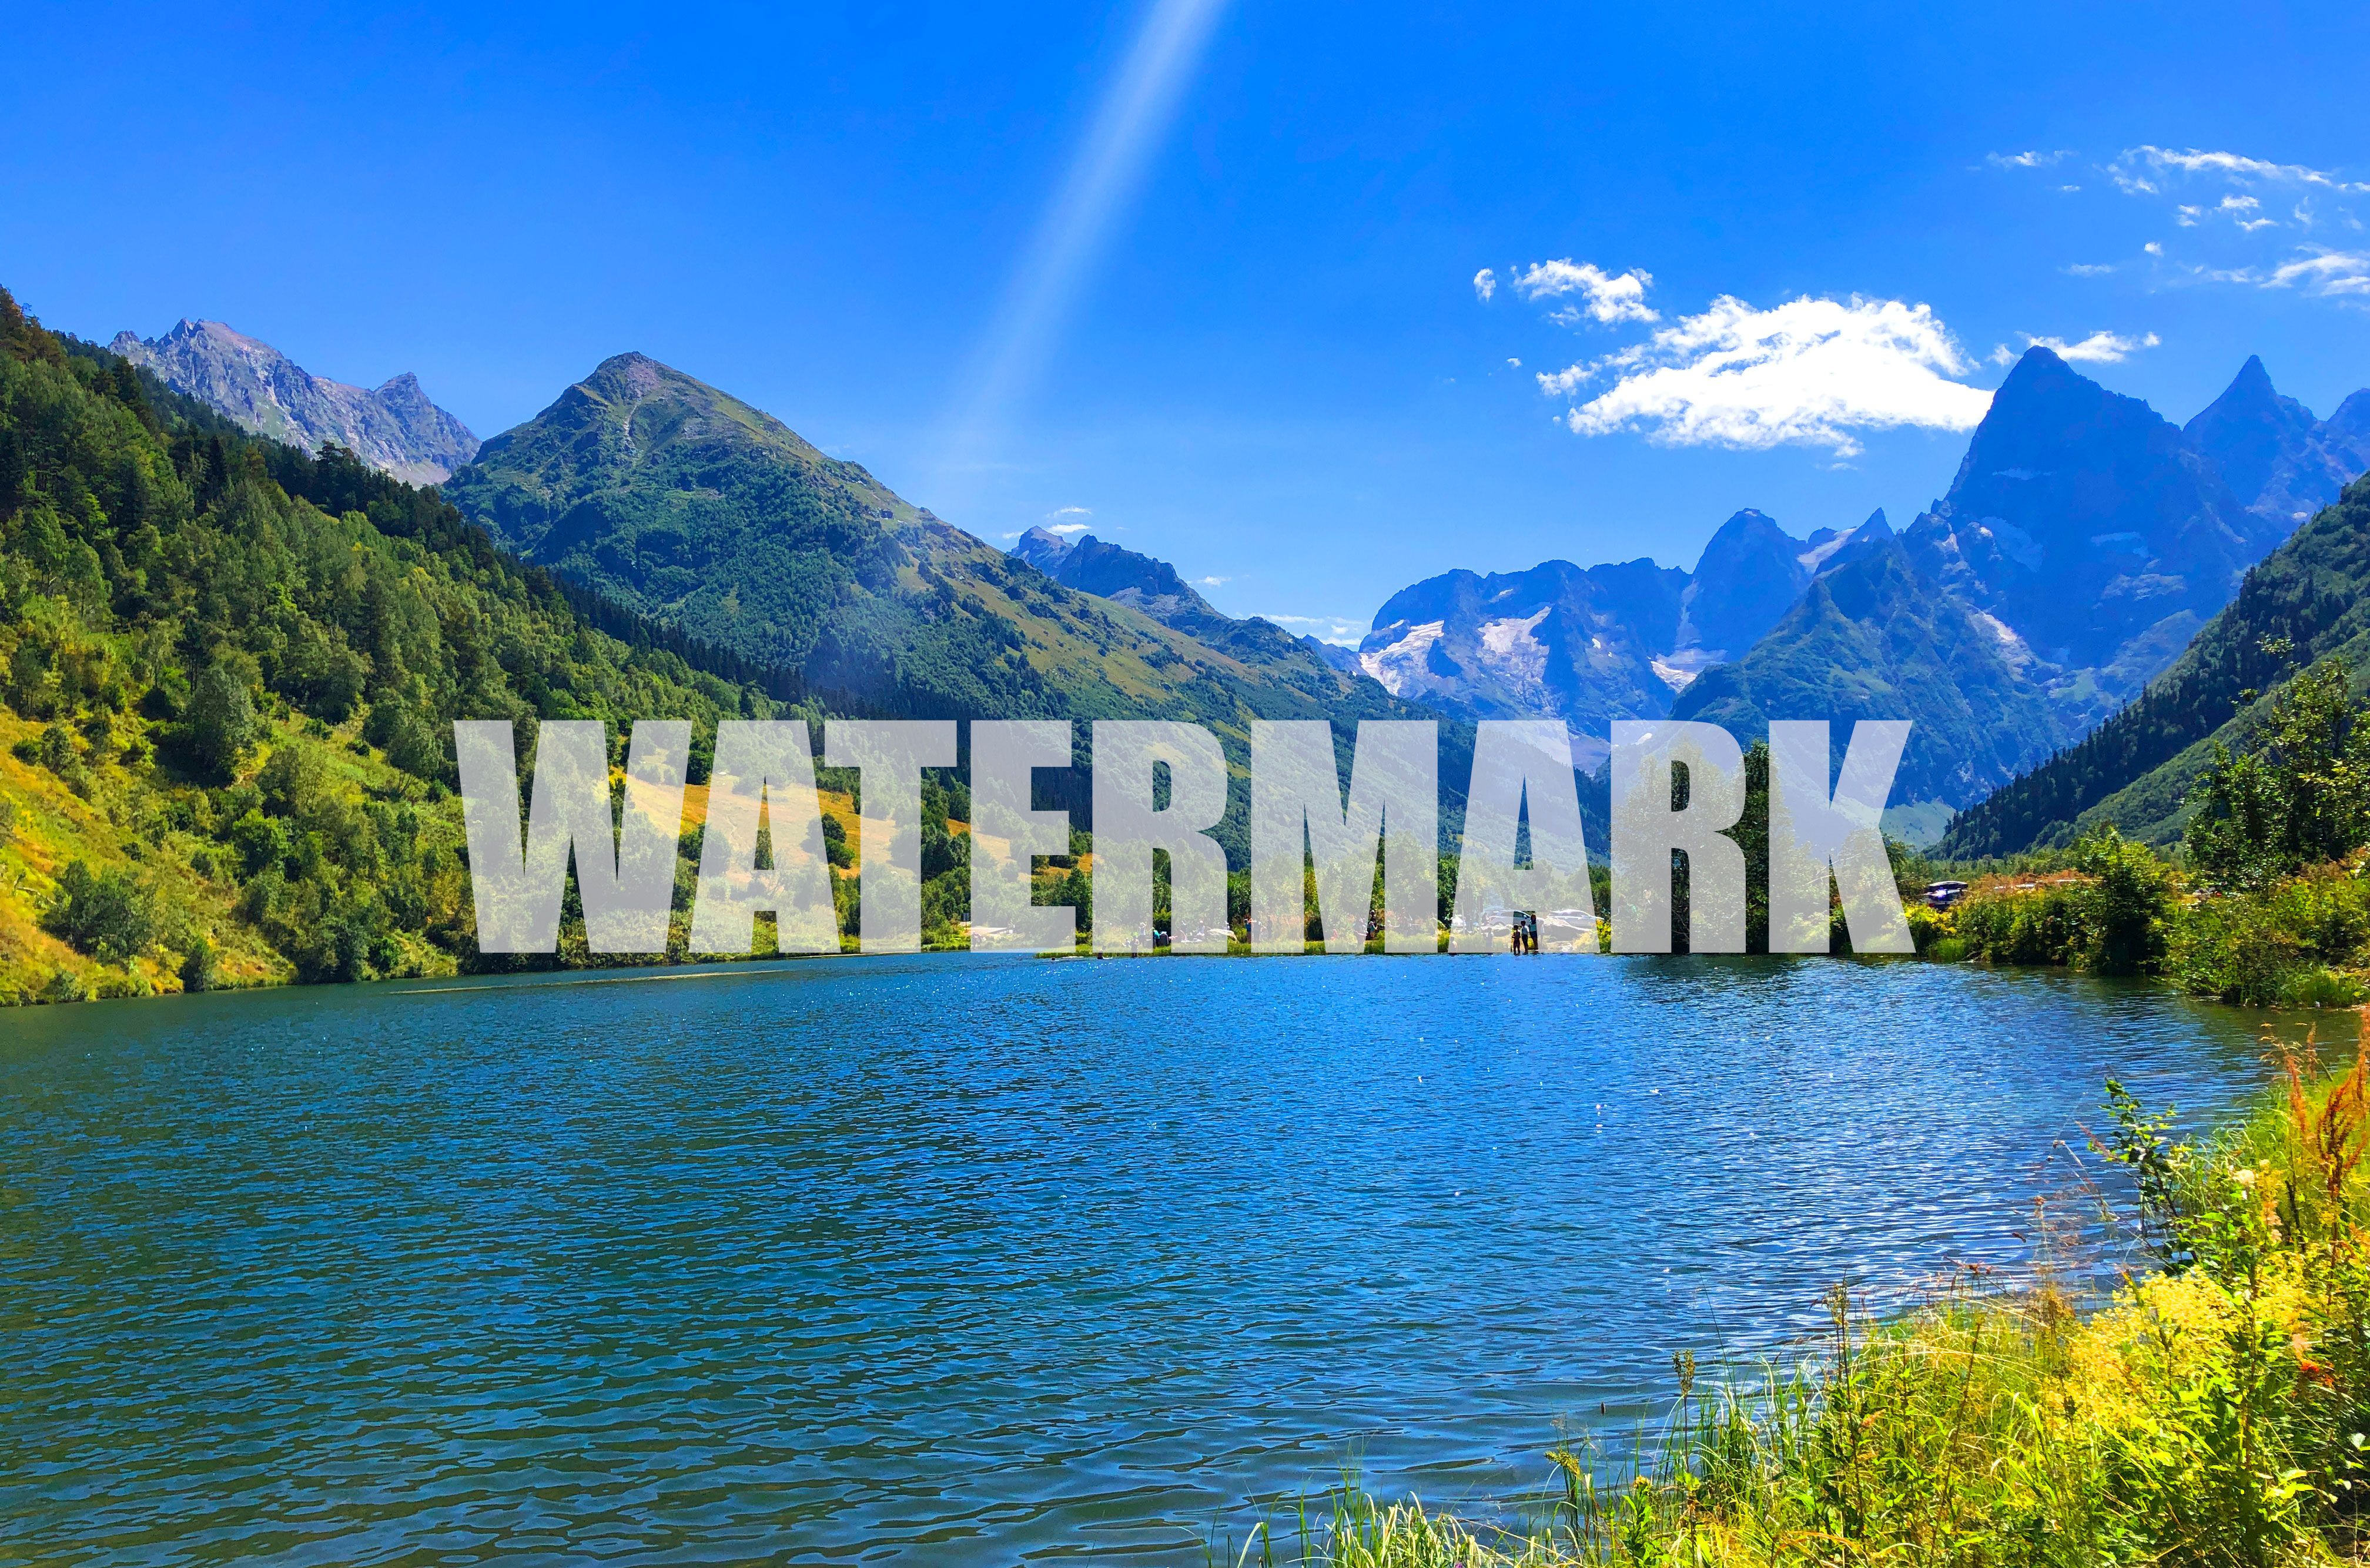 Add text watermark to photos.